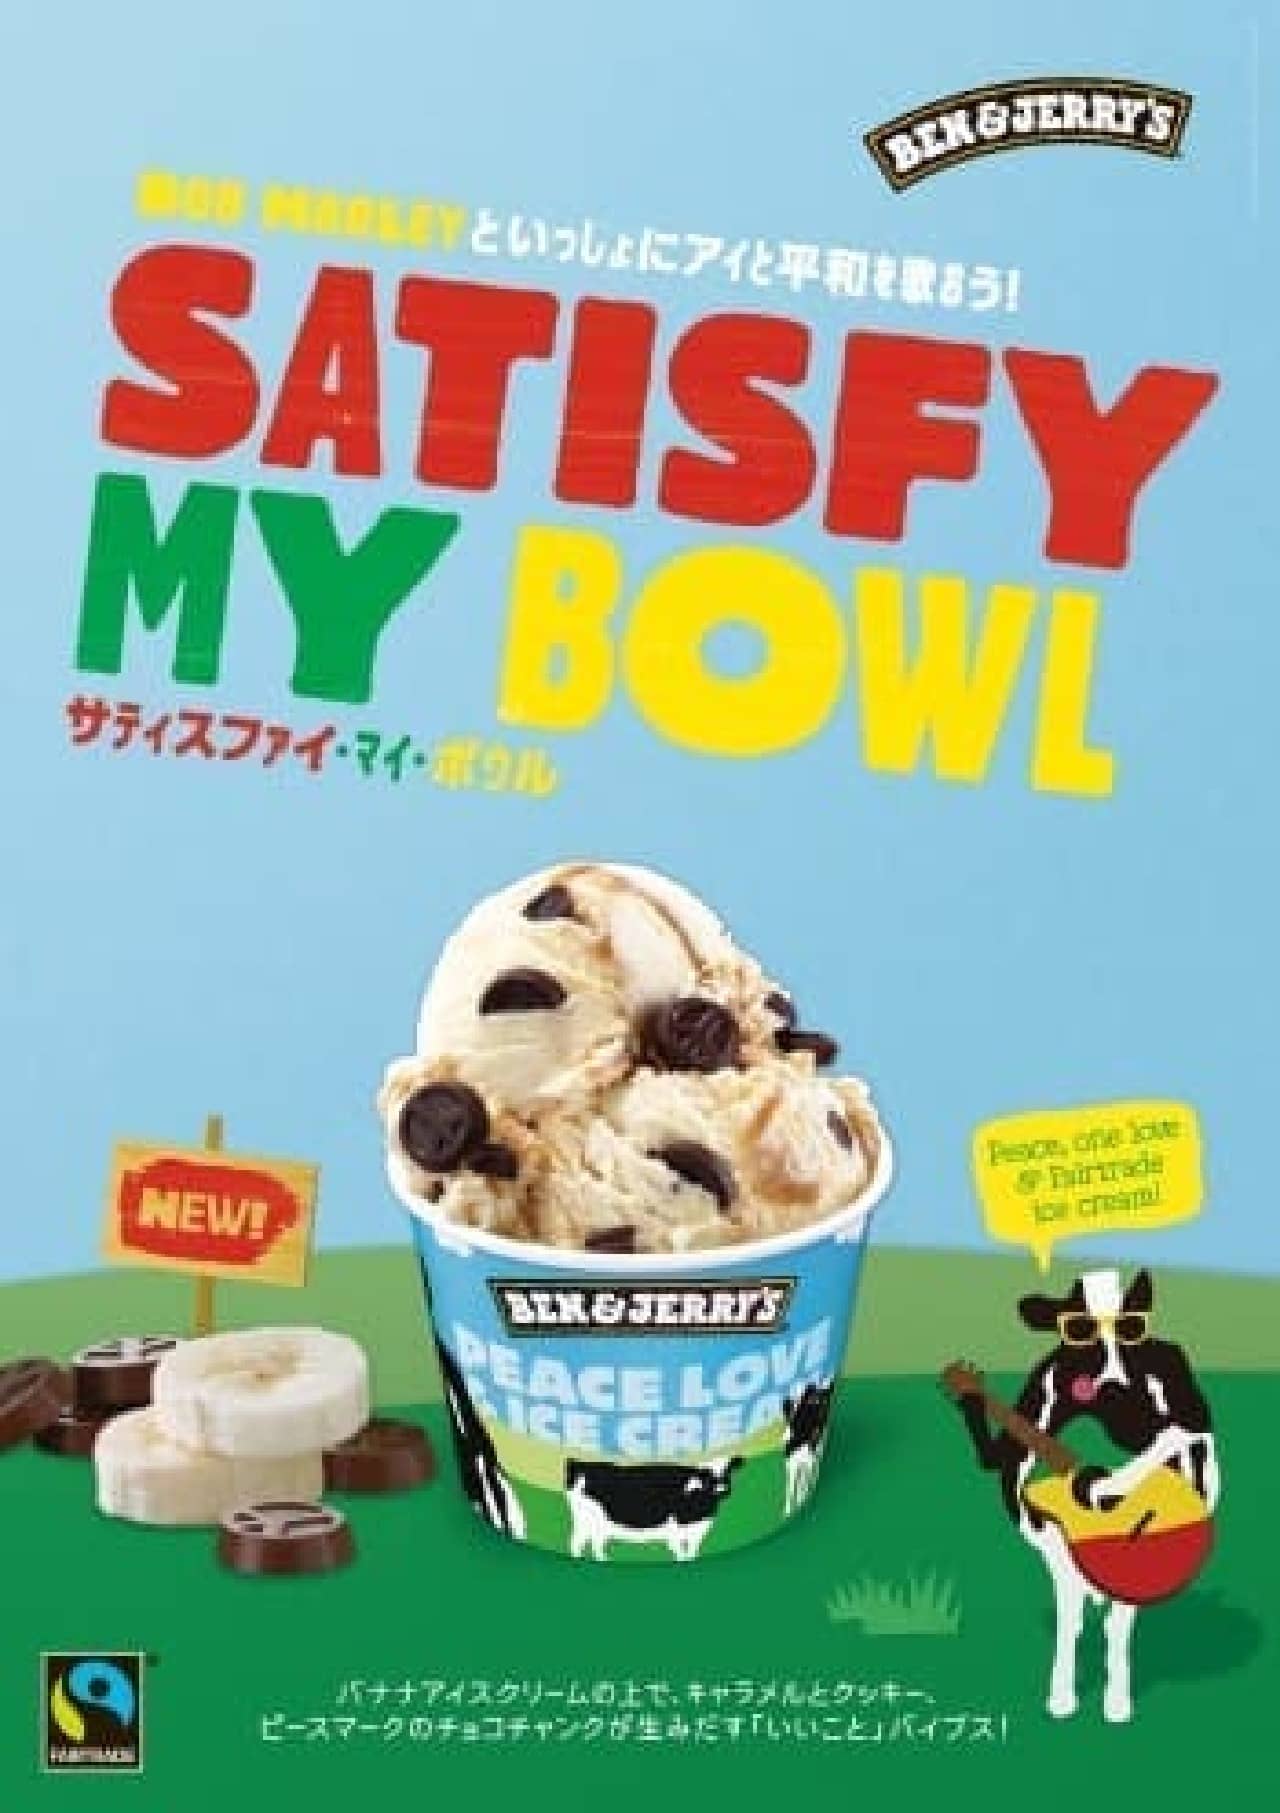 ben and jerrys japan